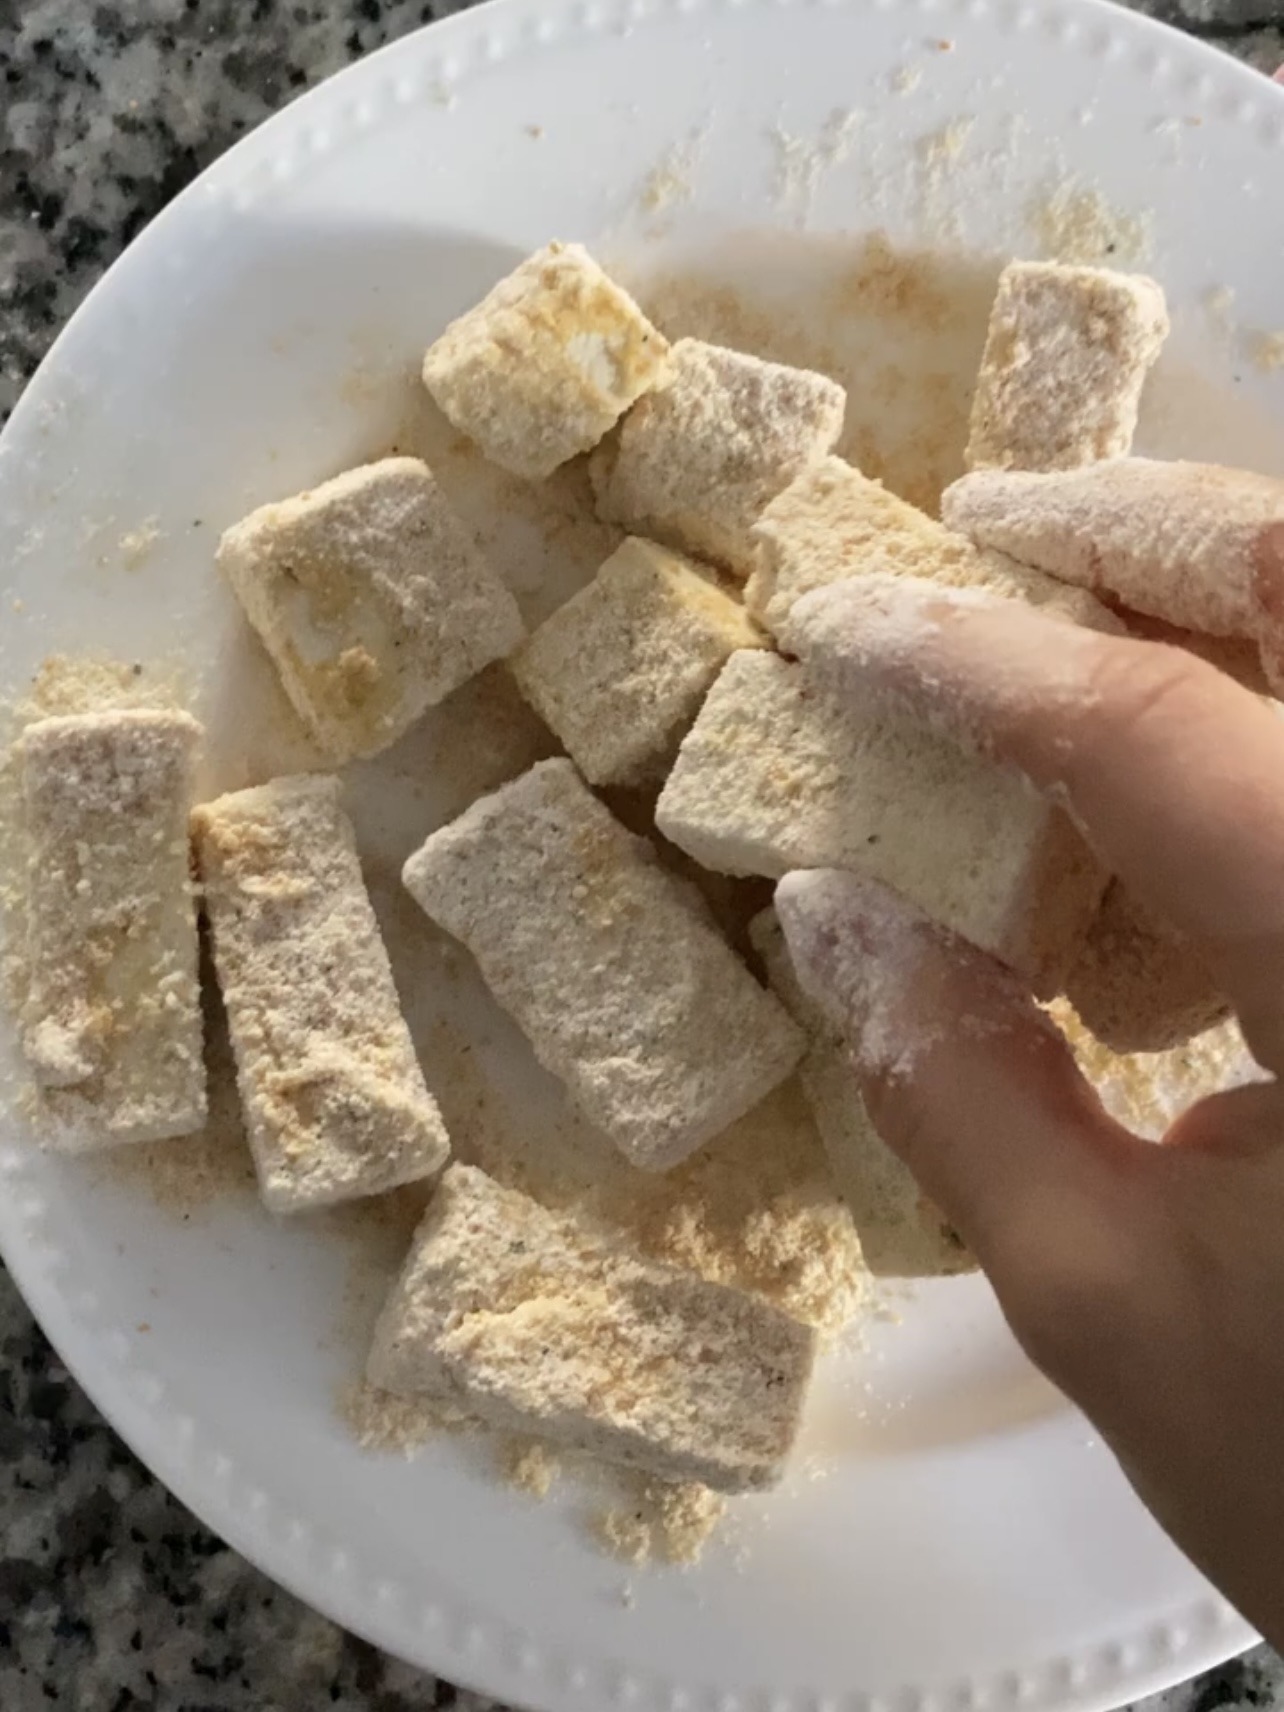 Step 2: In one bowl, mix the almond milk and cornstarch together. In another bowl, mix the flour, bread crumbs, and seasonings together. Dip the tofu pieces into the wet mixture and then immediately dip into the dry dredge. Set aside until ready to fry.